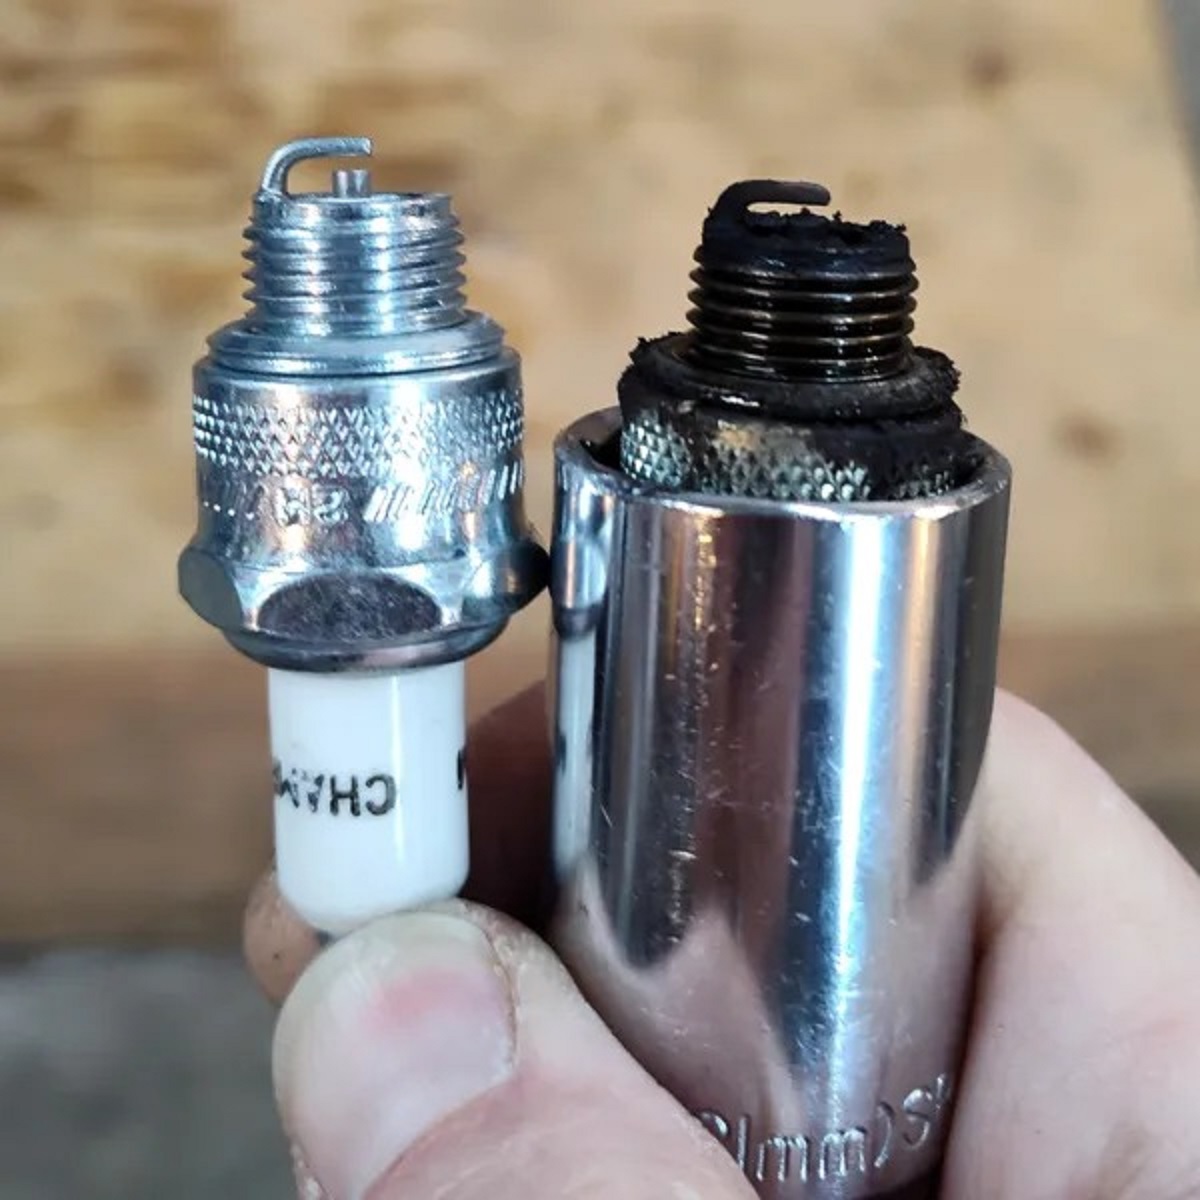 This 50-year old spark plug compared to it’s new replacement.